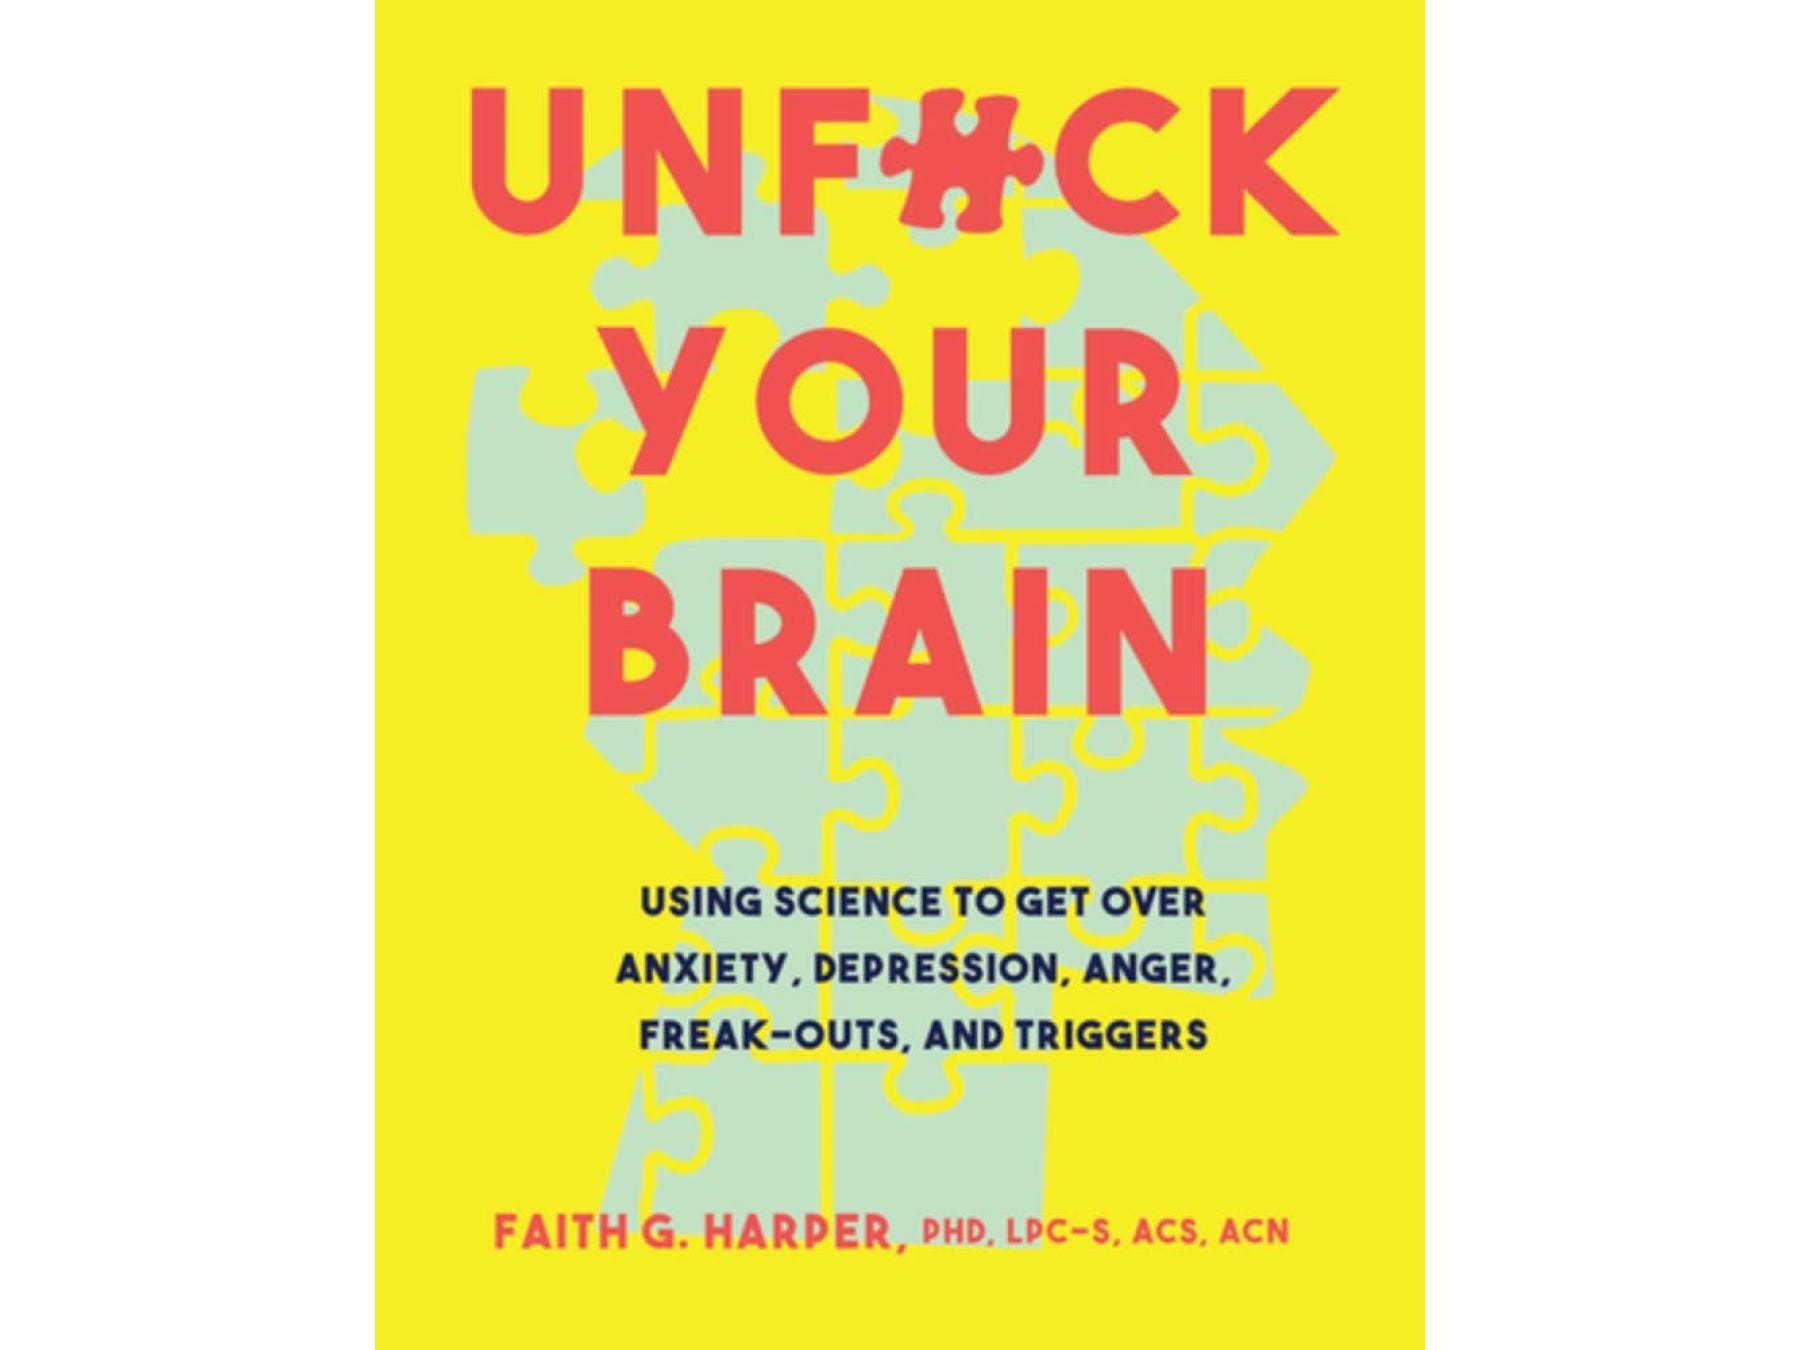 Unf*ck Your Brain: Getting Over Anxiety, Depression, Anger, Freak-Outs, and Triggers by Faith G. Harper